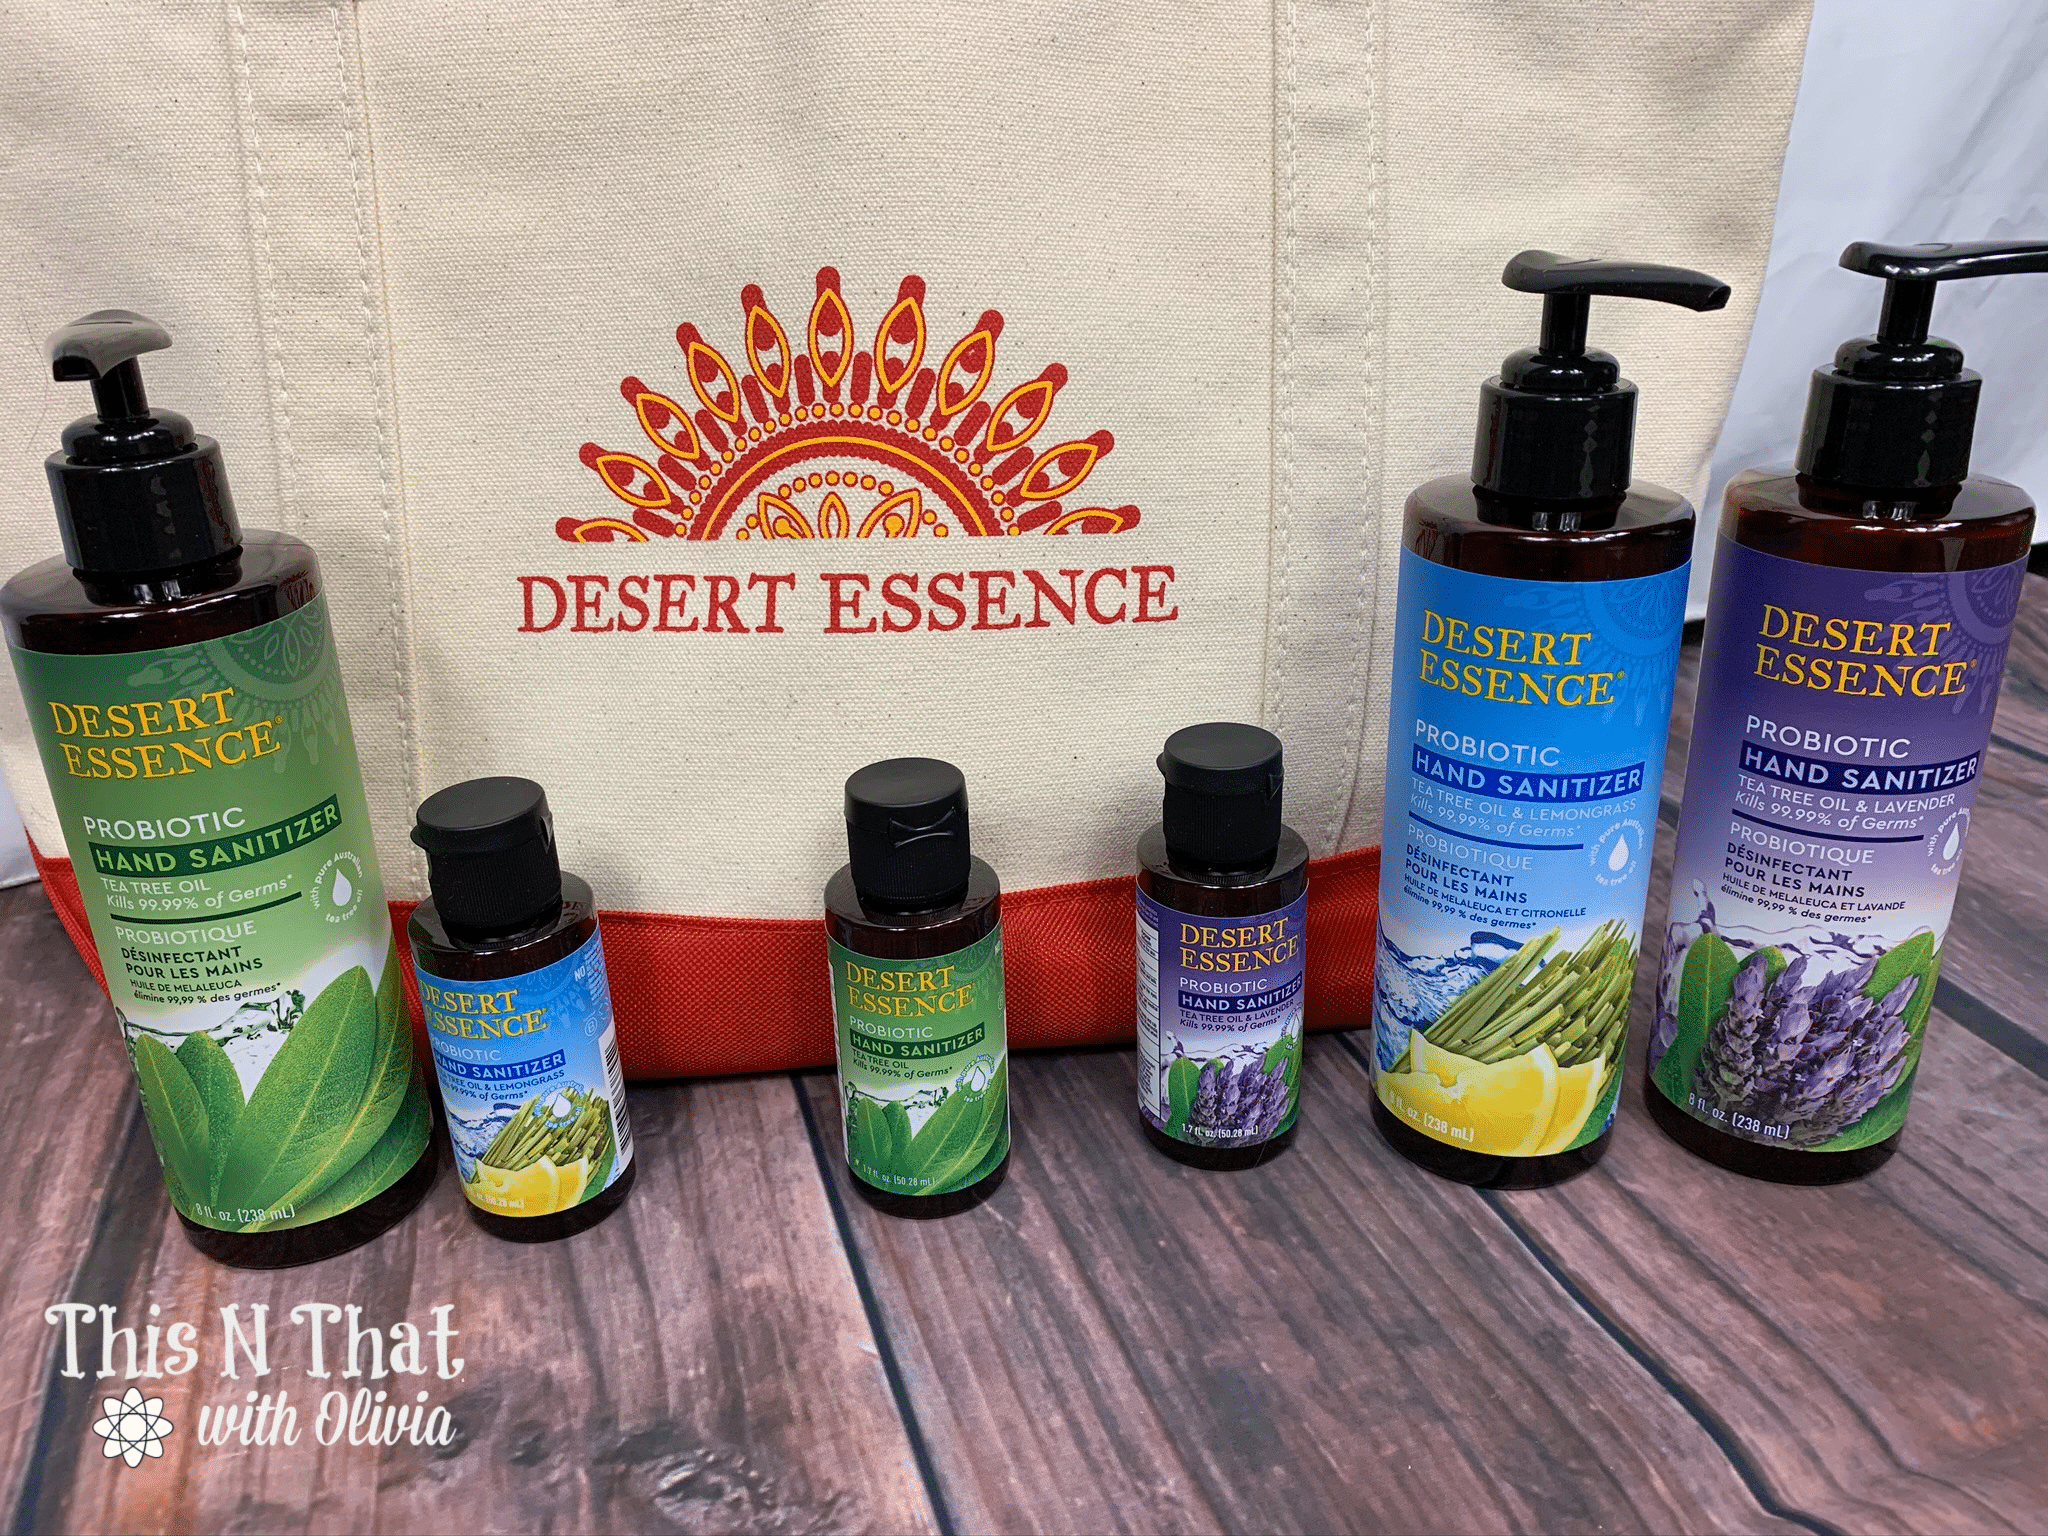 Keep Germs Away with Desert Essence Probiotic Hand Sanitizer